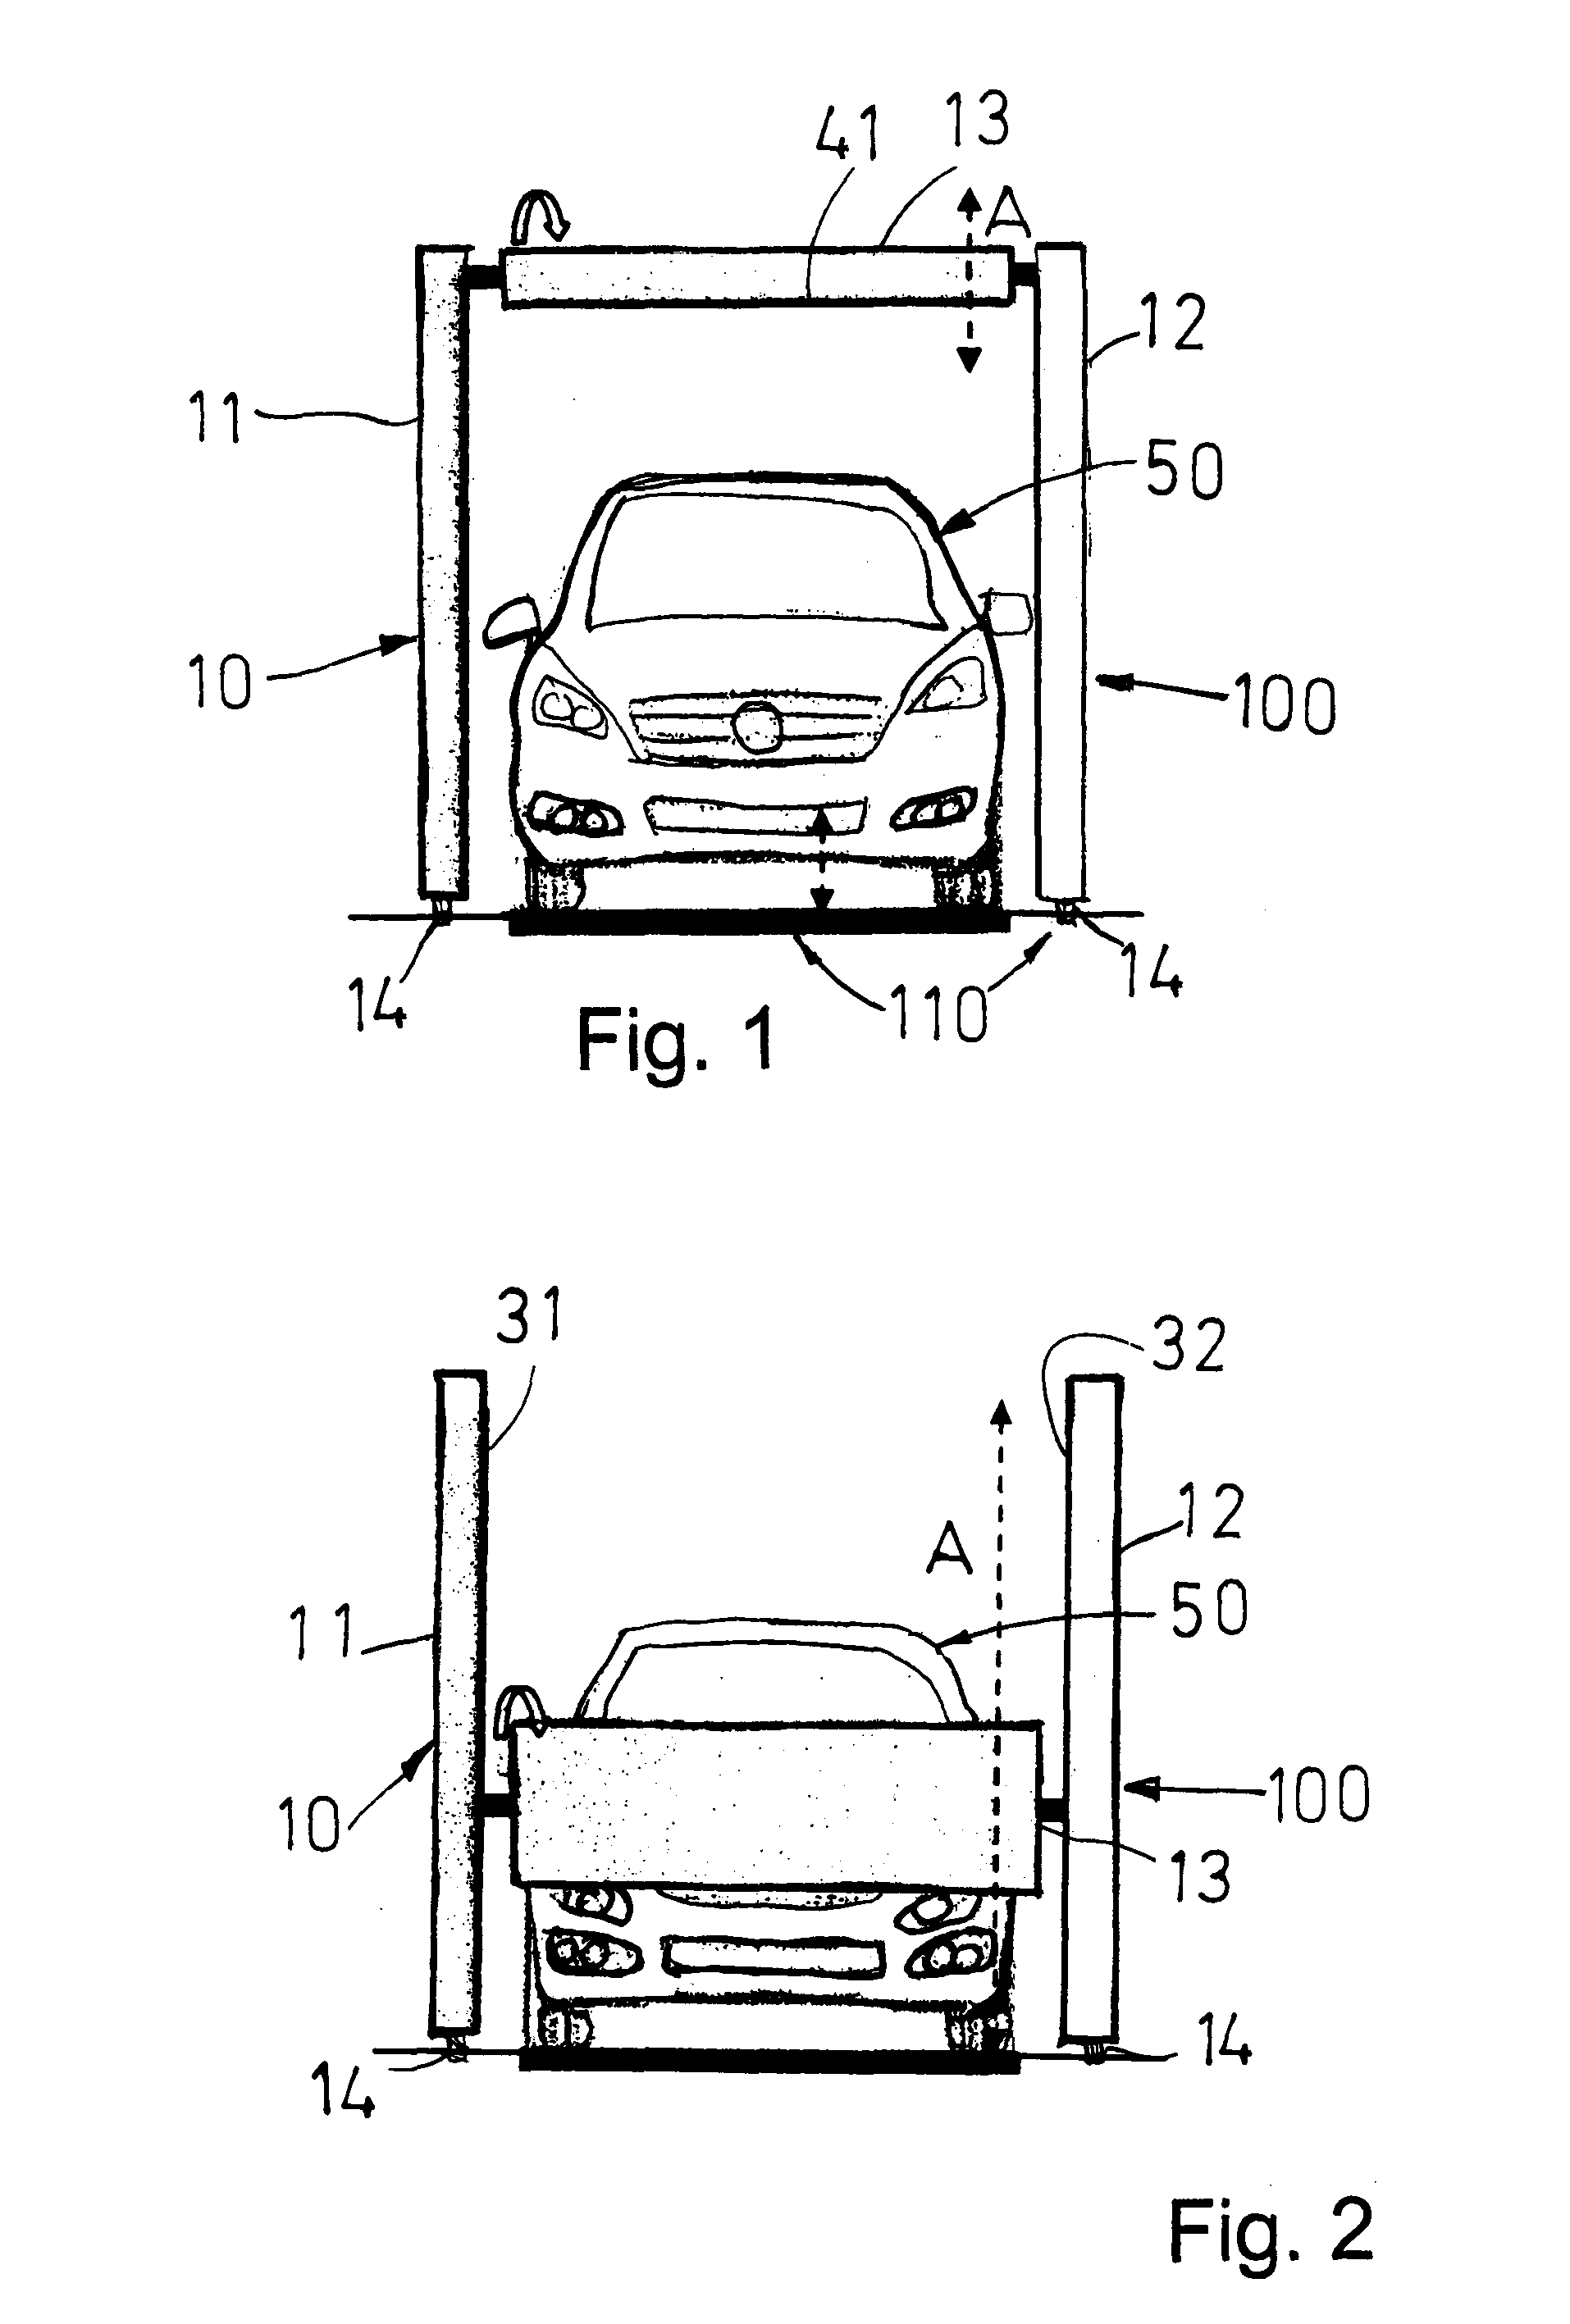 Device for, or in, the Surface Treatment of Objects